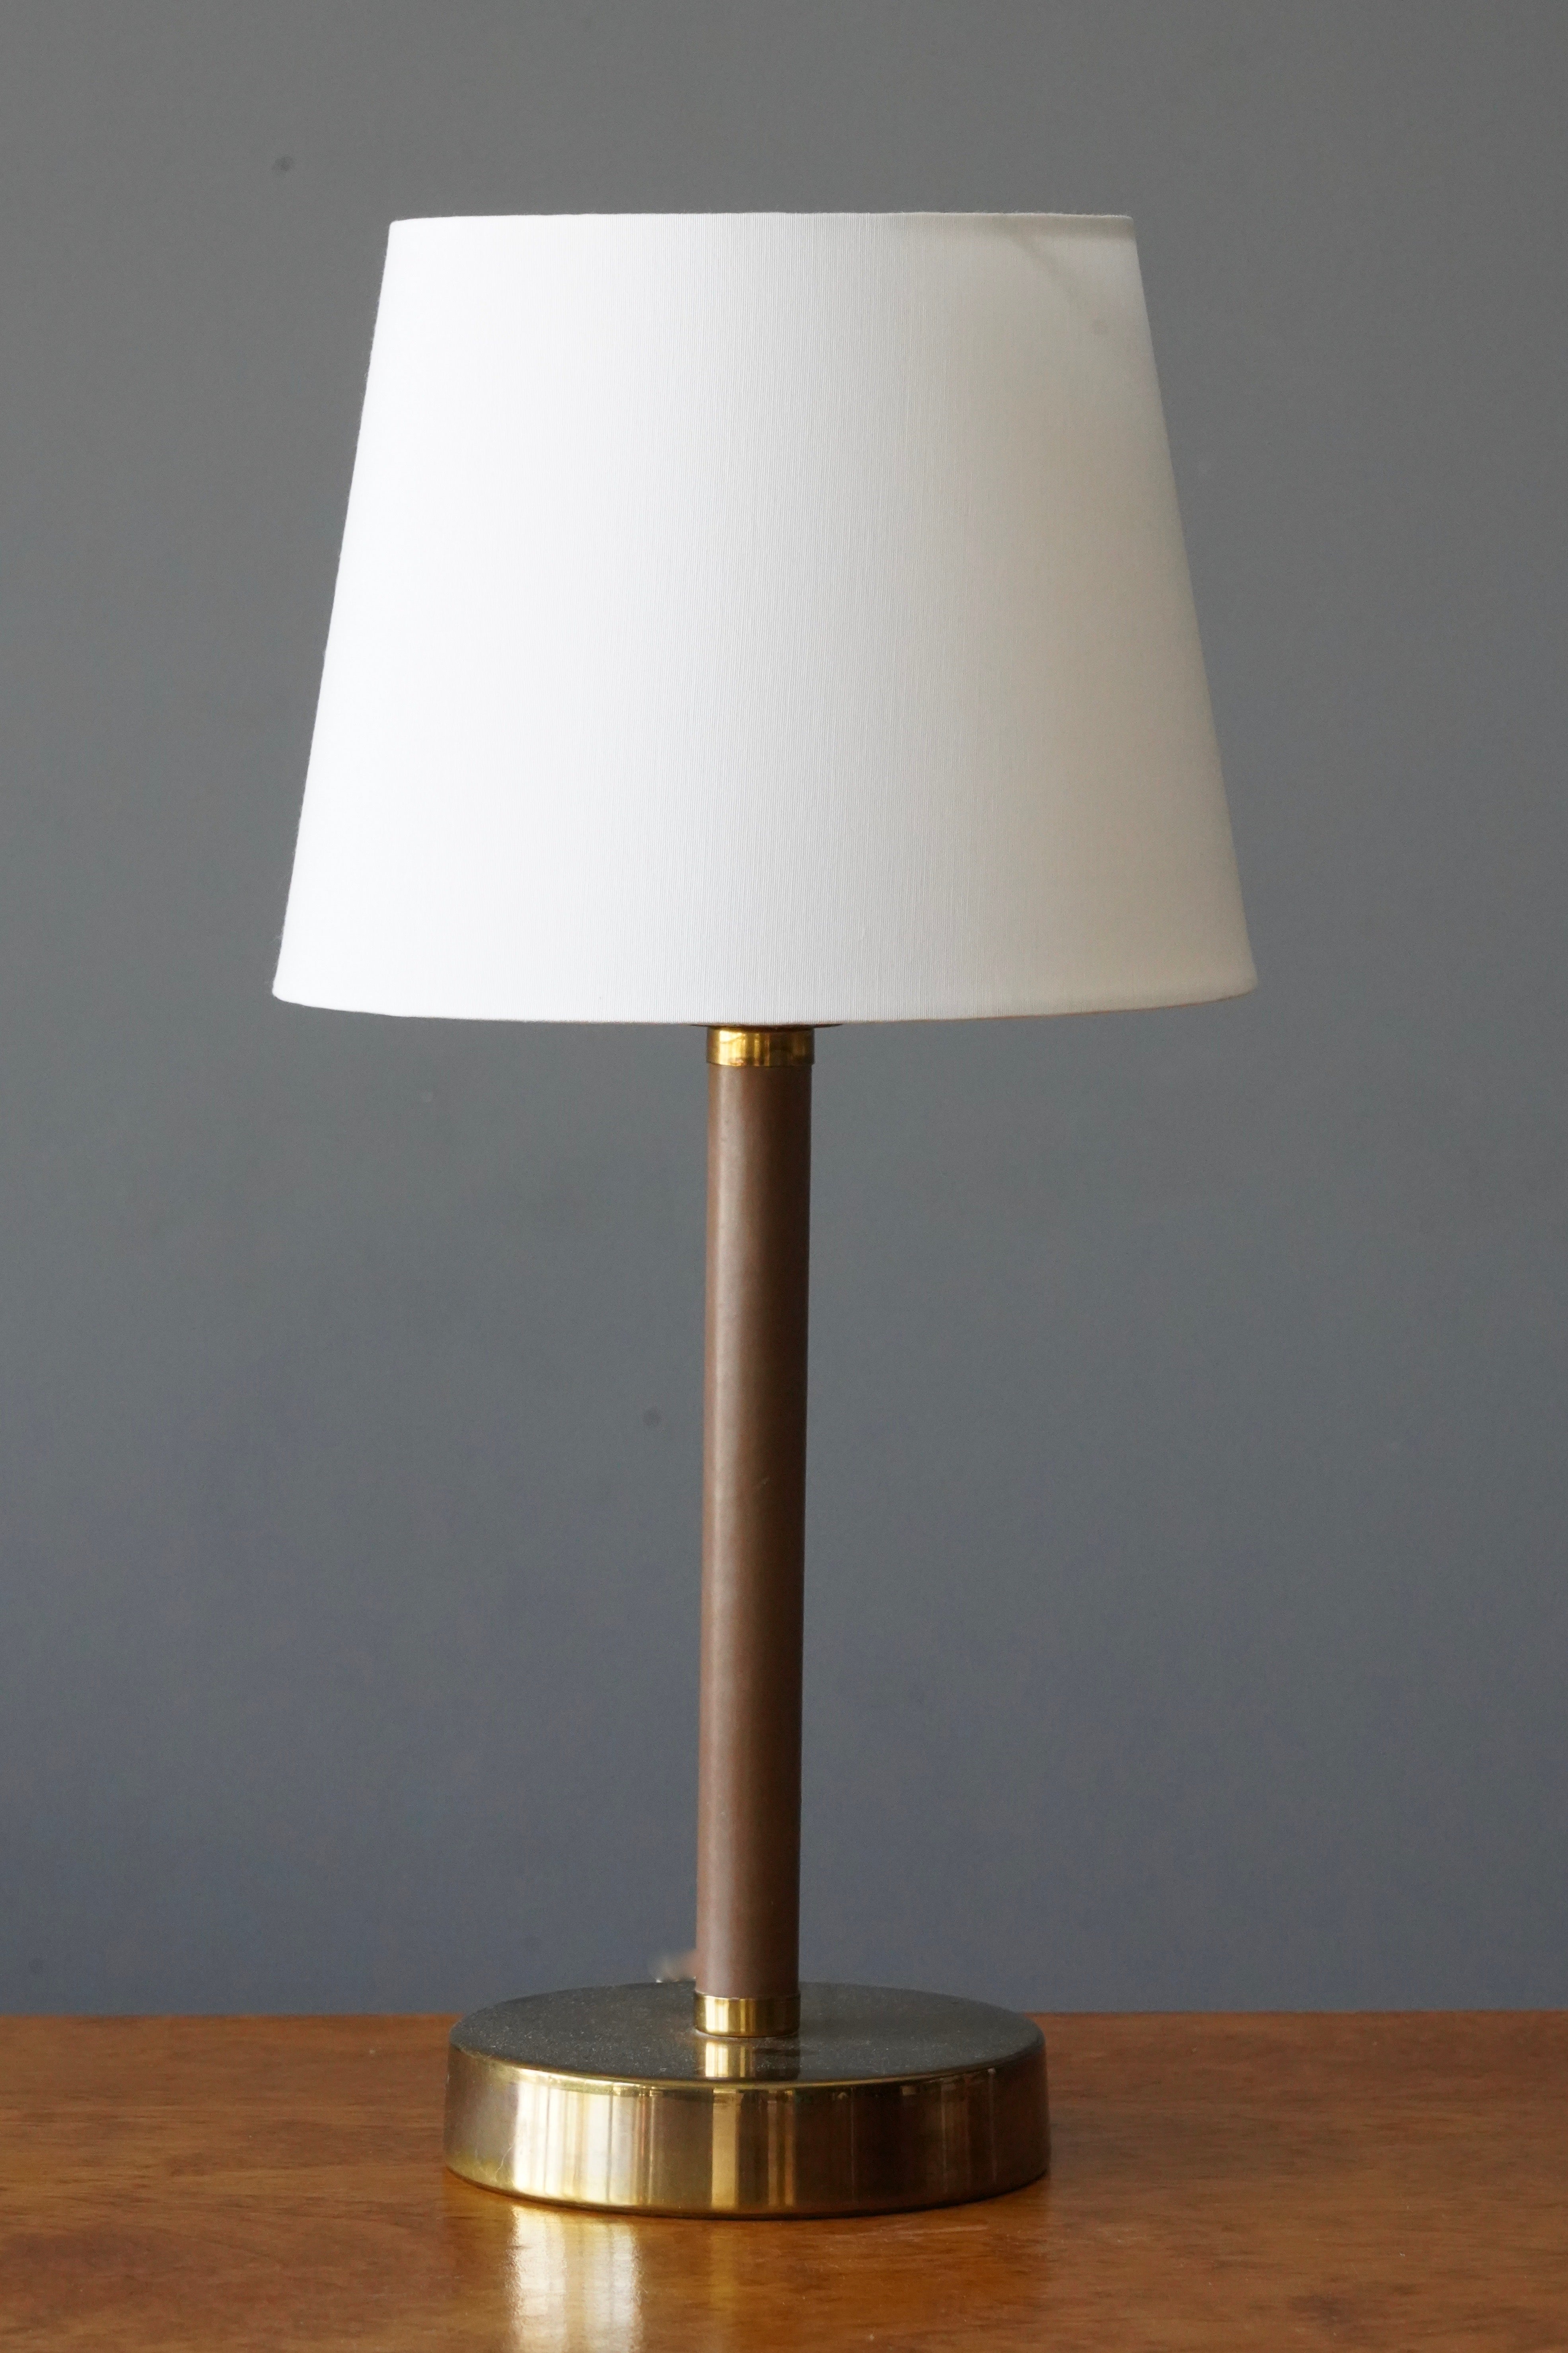 A table lamp, in brass and original brown leather. Designed and produced by ASEA, Sweden, 1950s.

Dimensions listed are without lampshade. Sold without lampshades.
Dimensions with shade: height is 20.5 inches, width is 10 inches.
Dimensions of